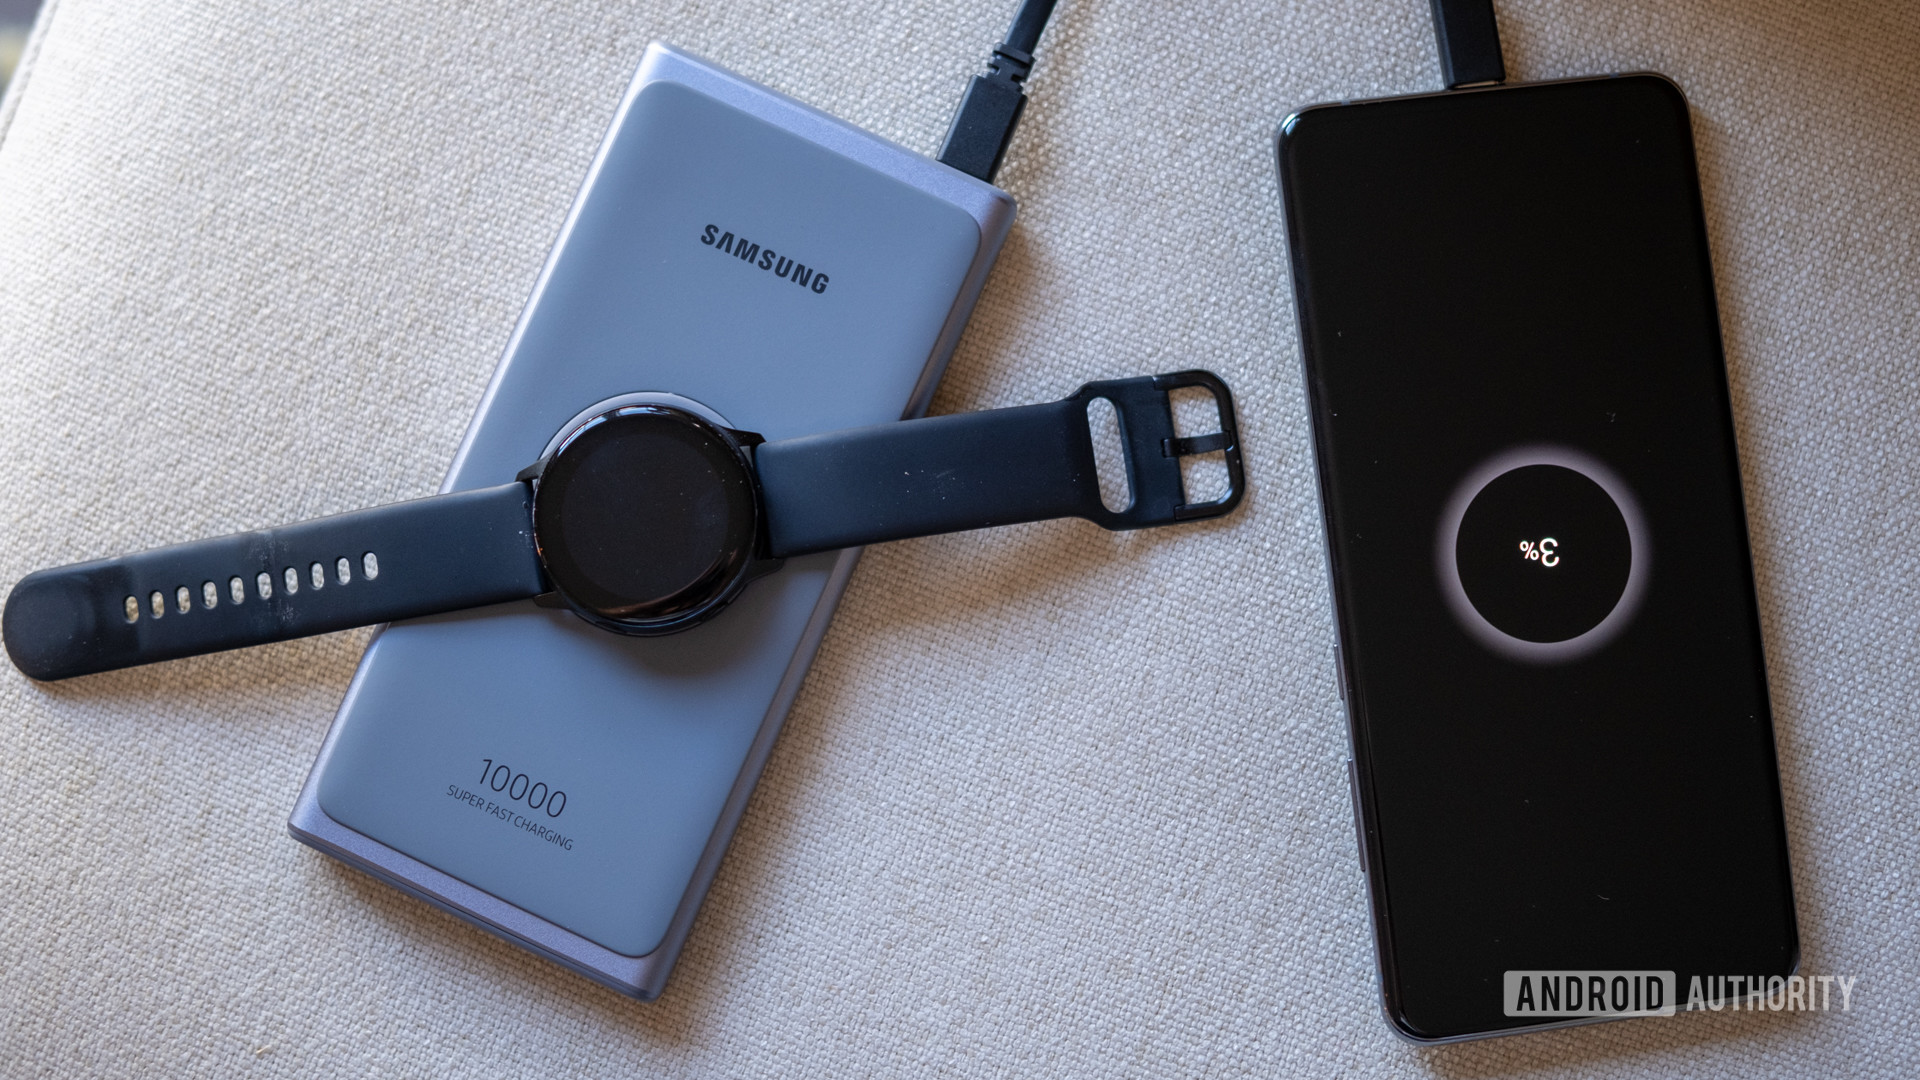 A top down image of the Samsung Super Fast power bank charging a Galaxy Watch Active and a Galaxy S20 Ultra